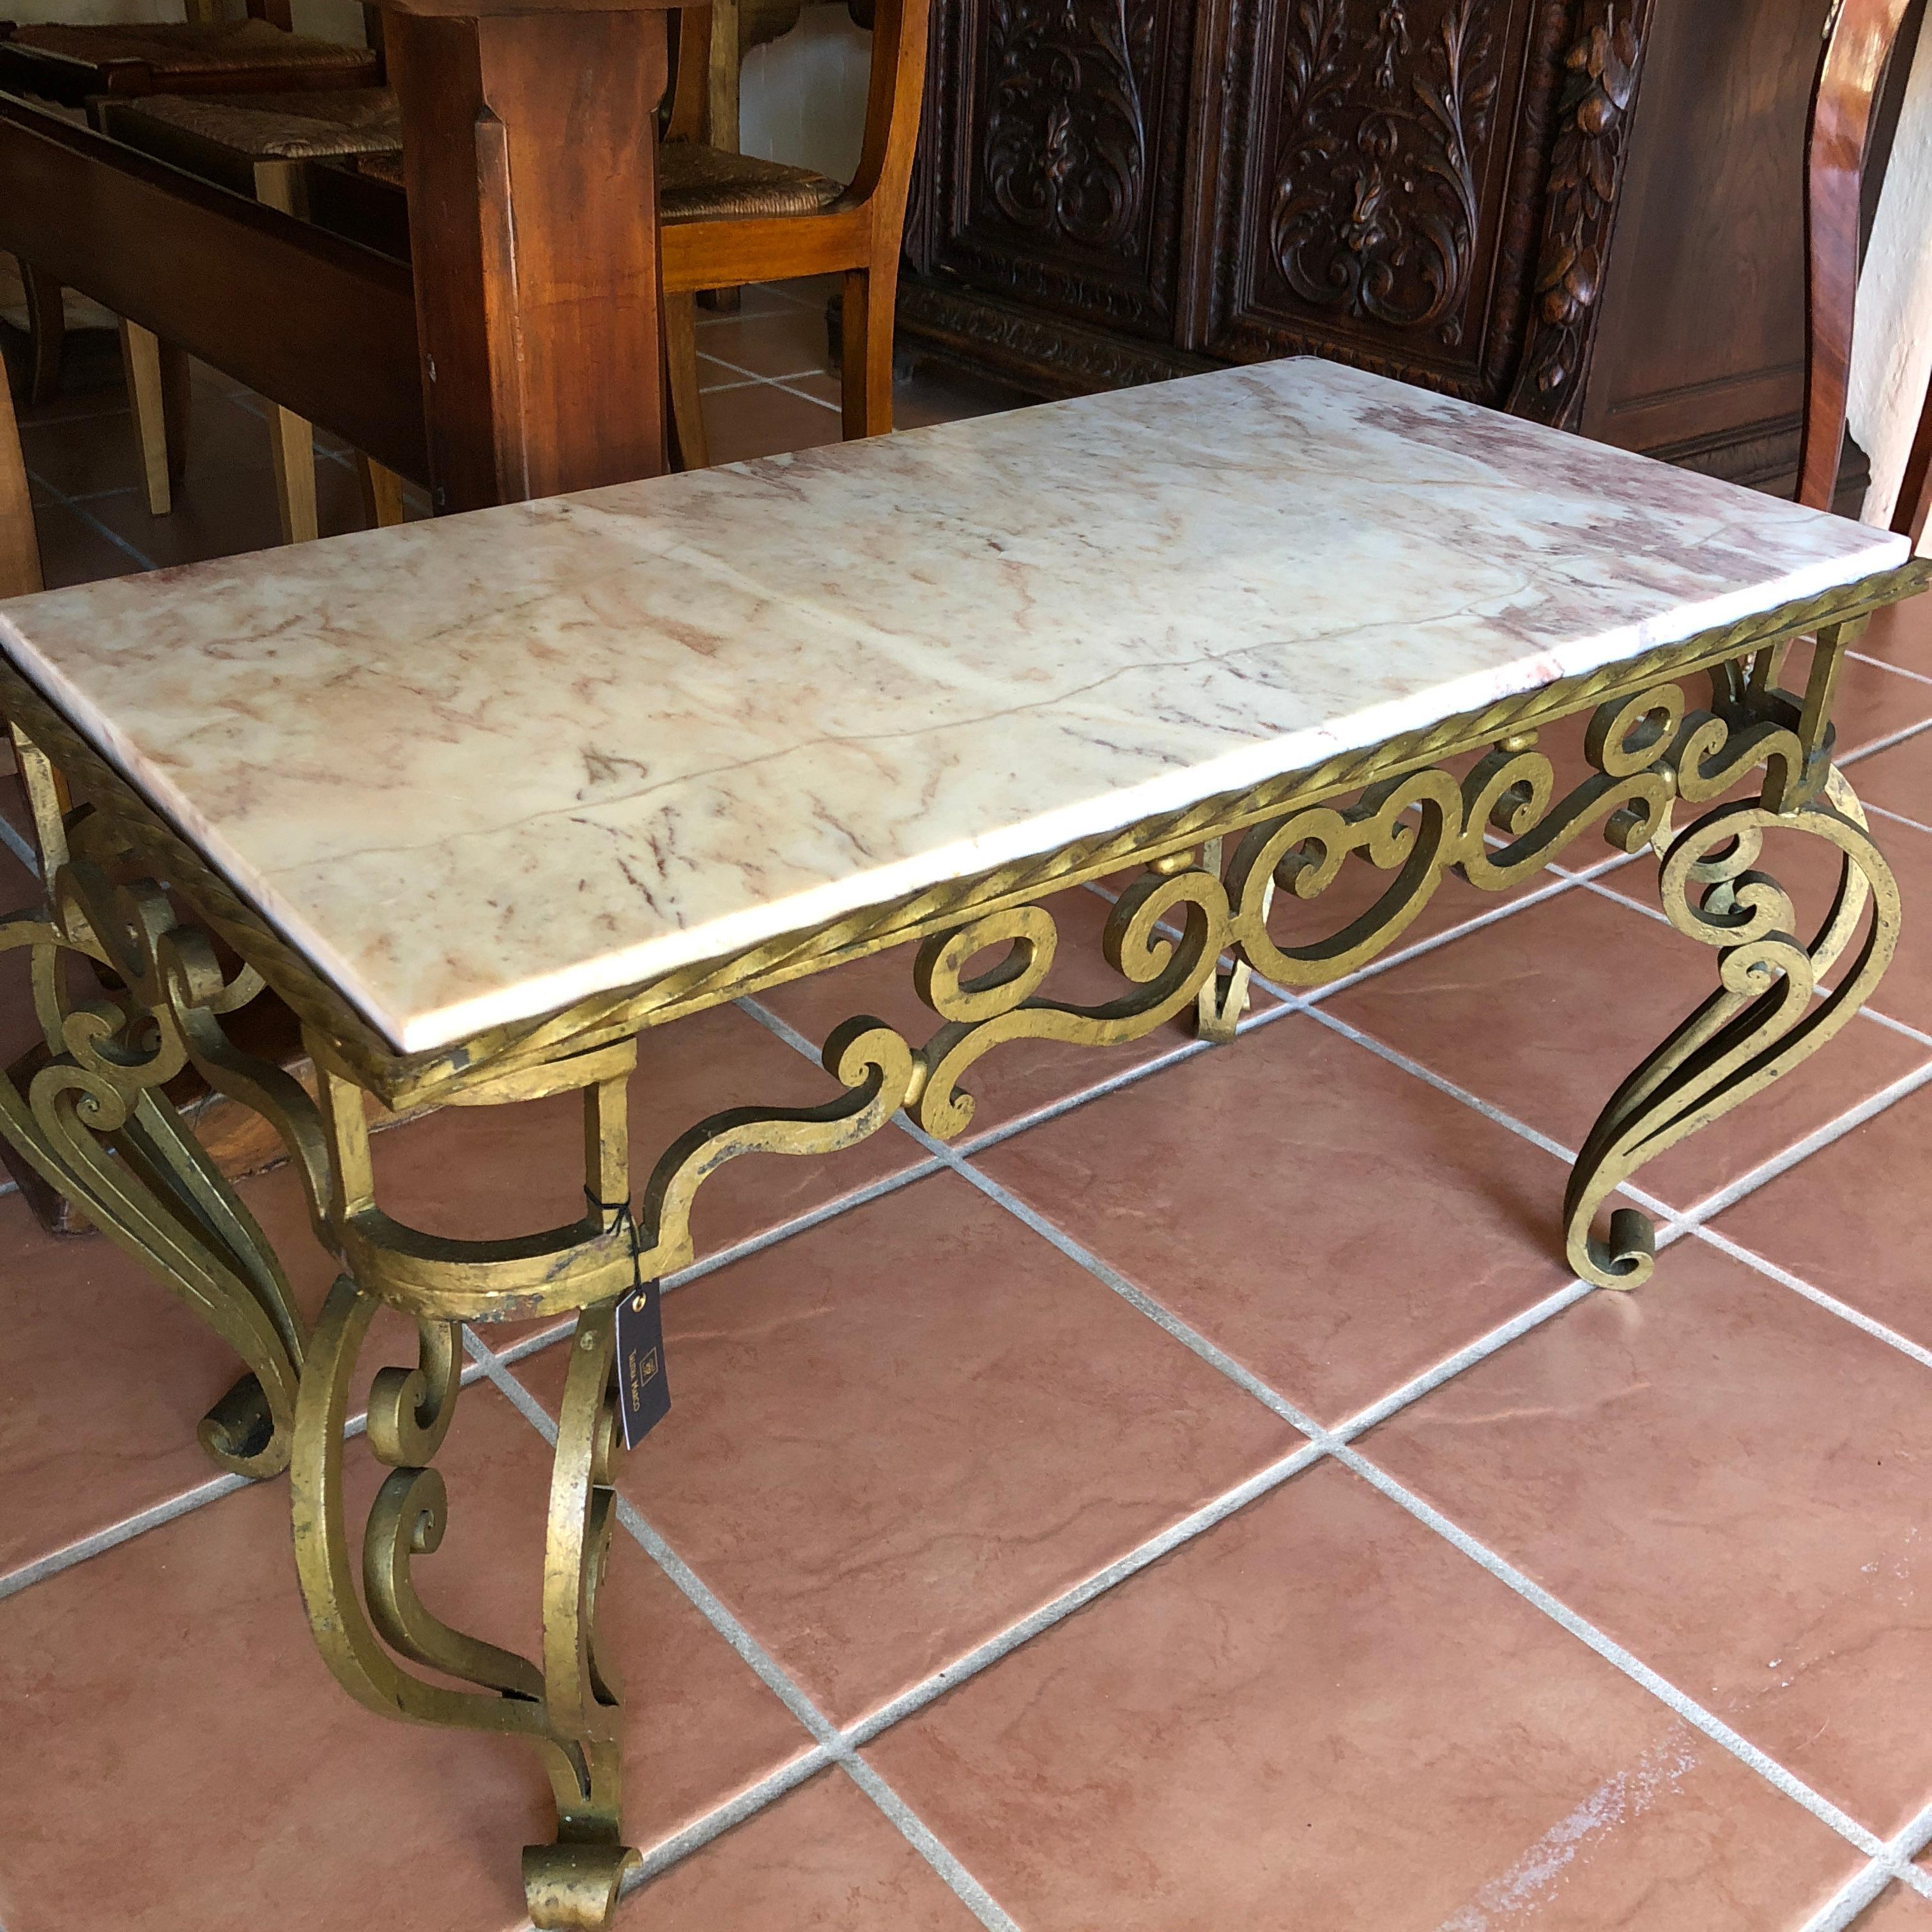 This elegant rose marble French coffee table is the perfect addition to a muted hued living room or formal lounge. Rose marble adorns the top of the table with grey and white veins throughout. The lower portion of the table is made from superb